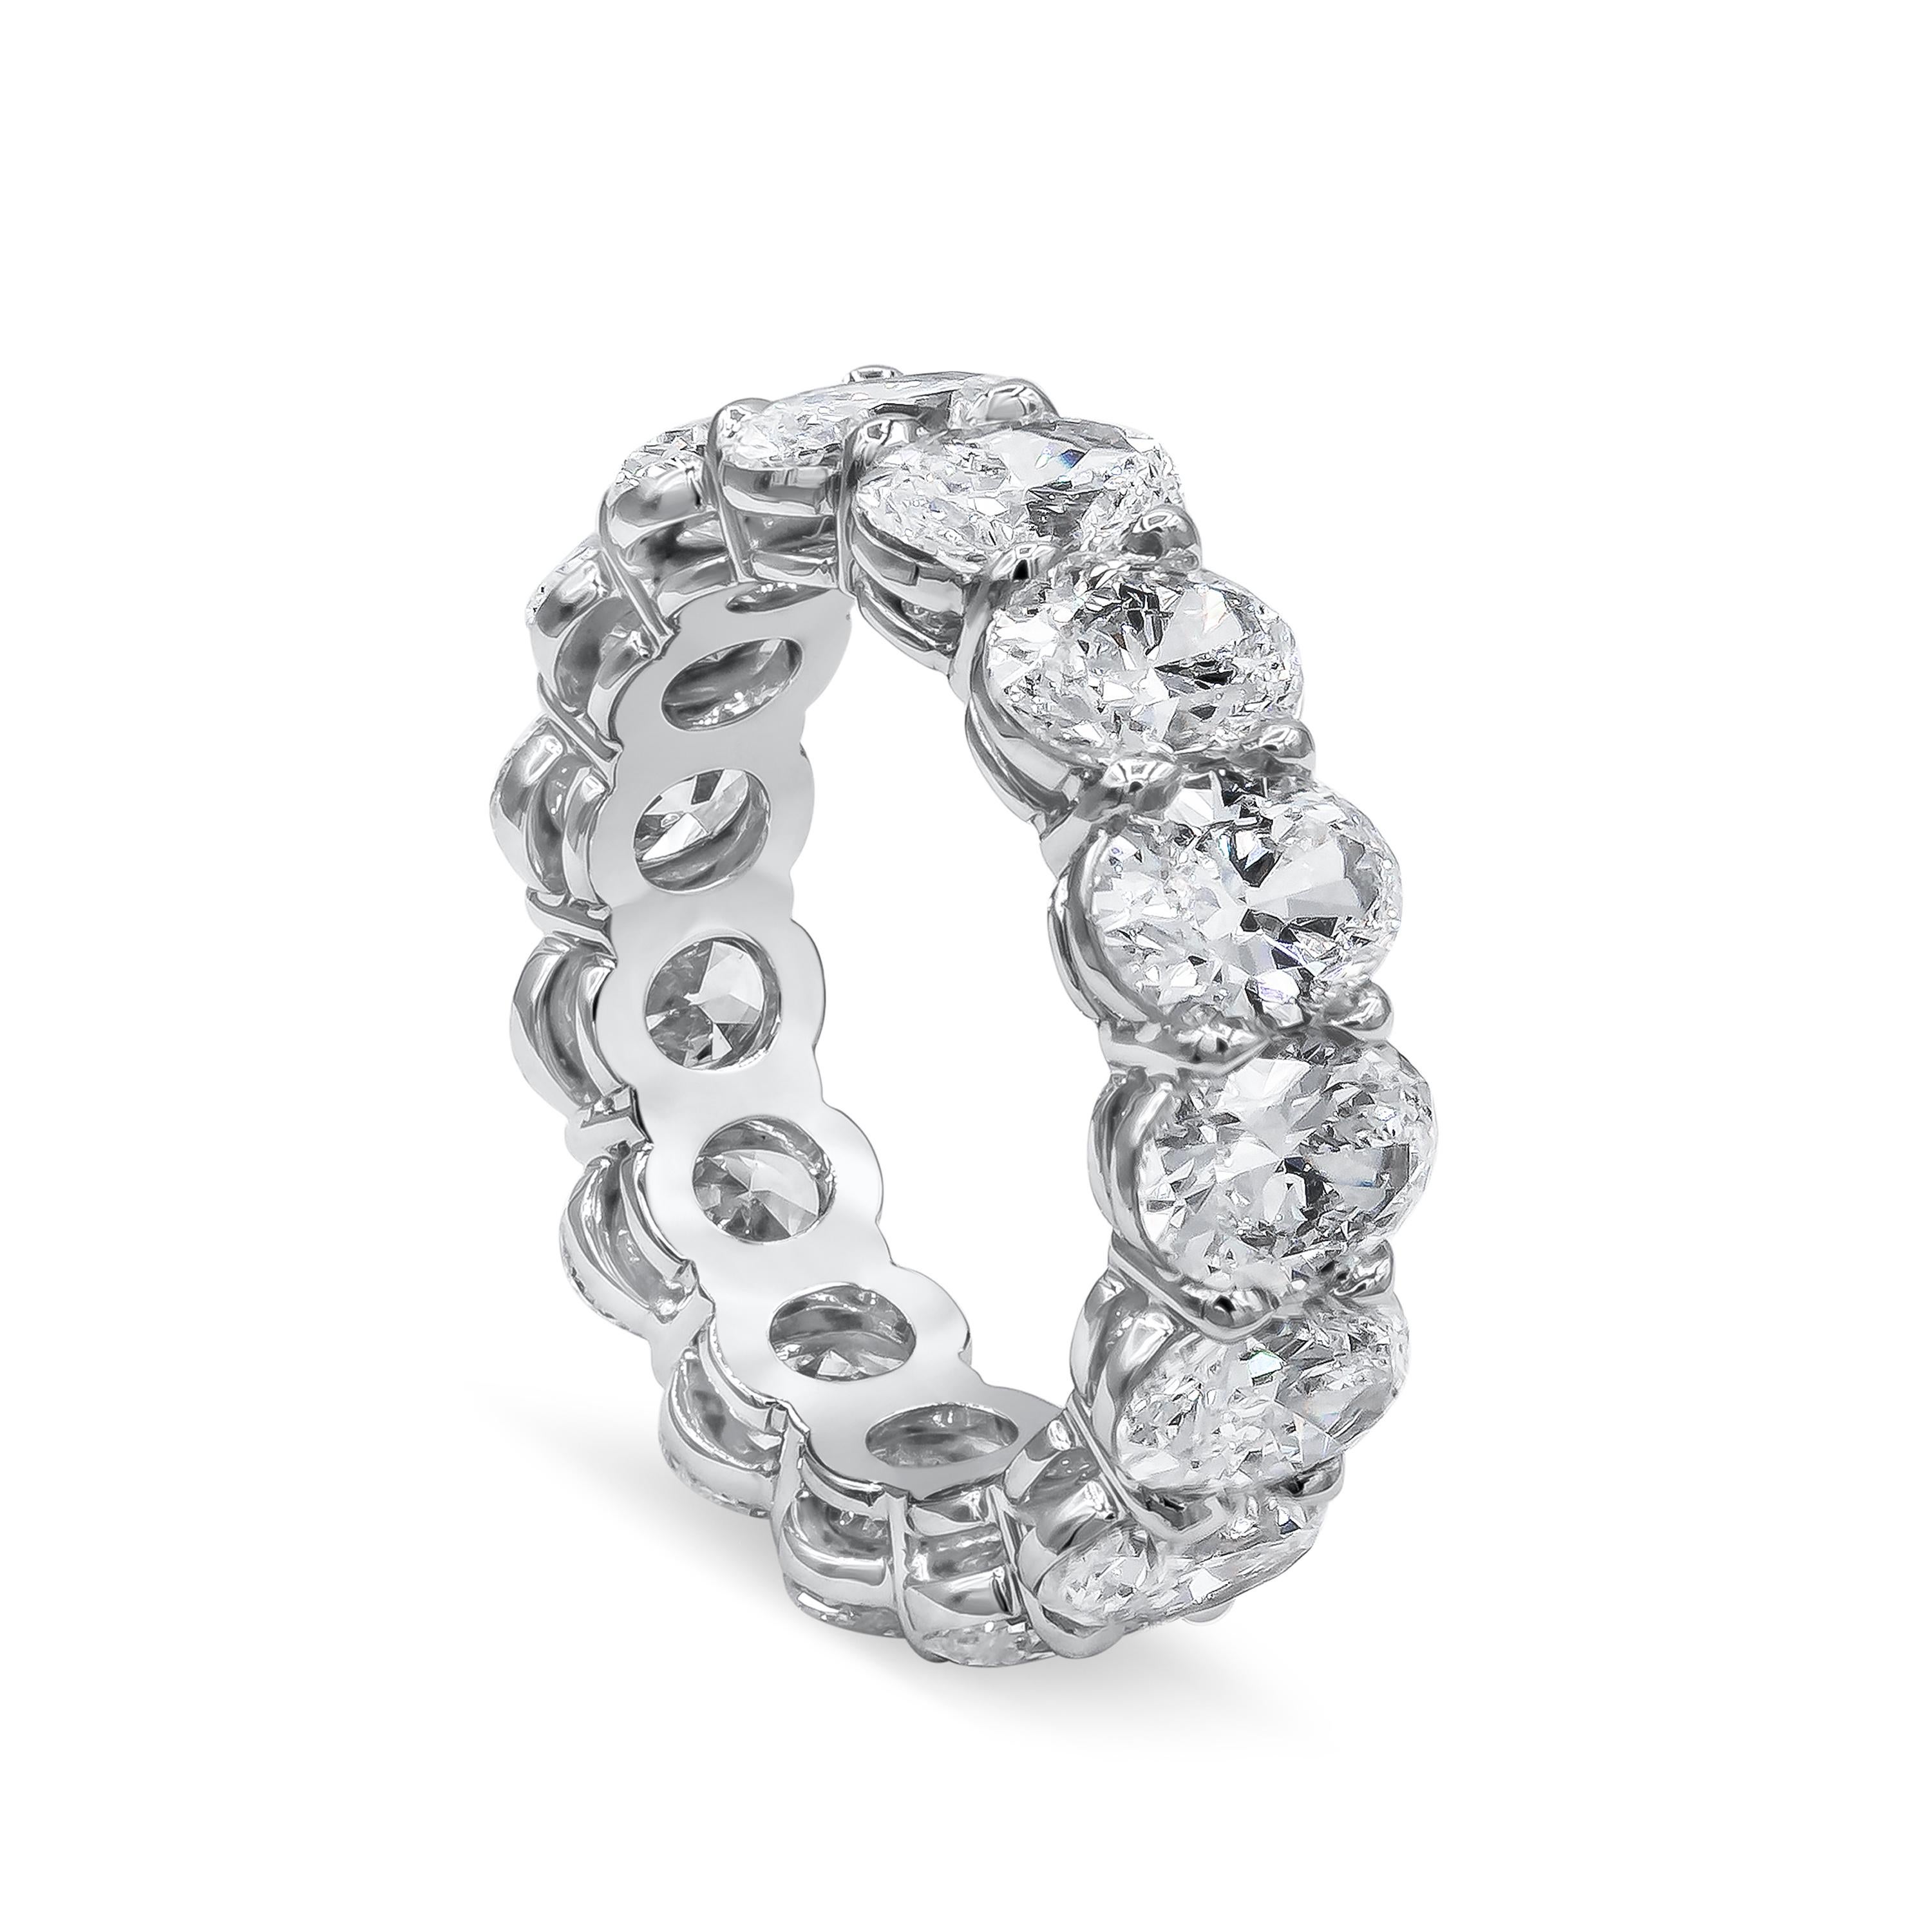 A brilliant eternity wedding band showcasing oval cut diamonds set in a shared prong, platinum mounting. Diamonds weigh 7.50 carats total. Each diamond is GIA certified as E-F color, SI clarity. Size 6 US.

Roman Malakov is a custom house,